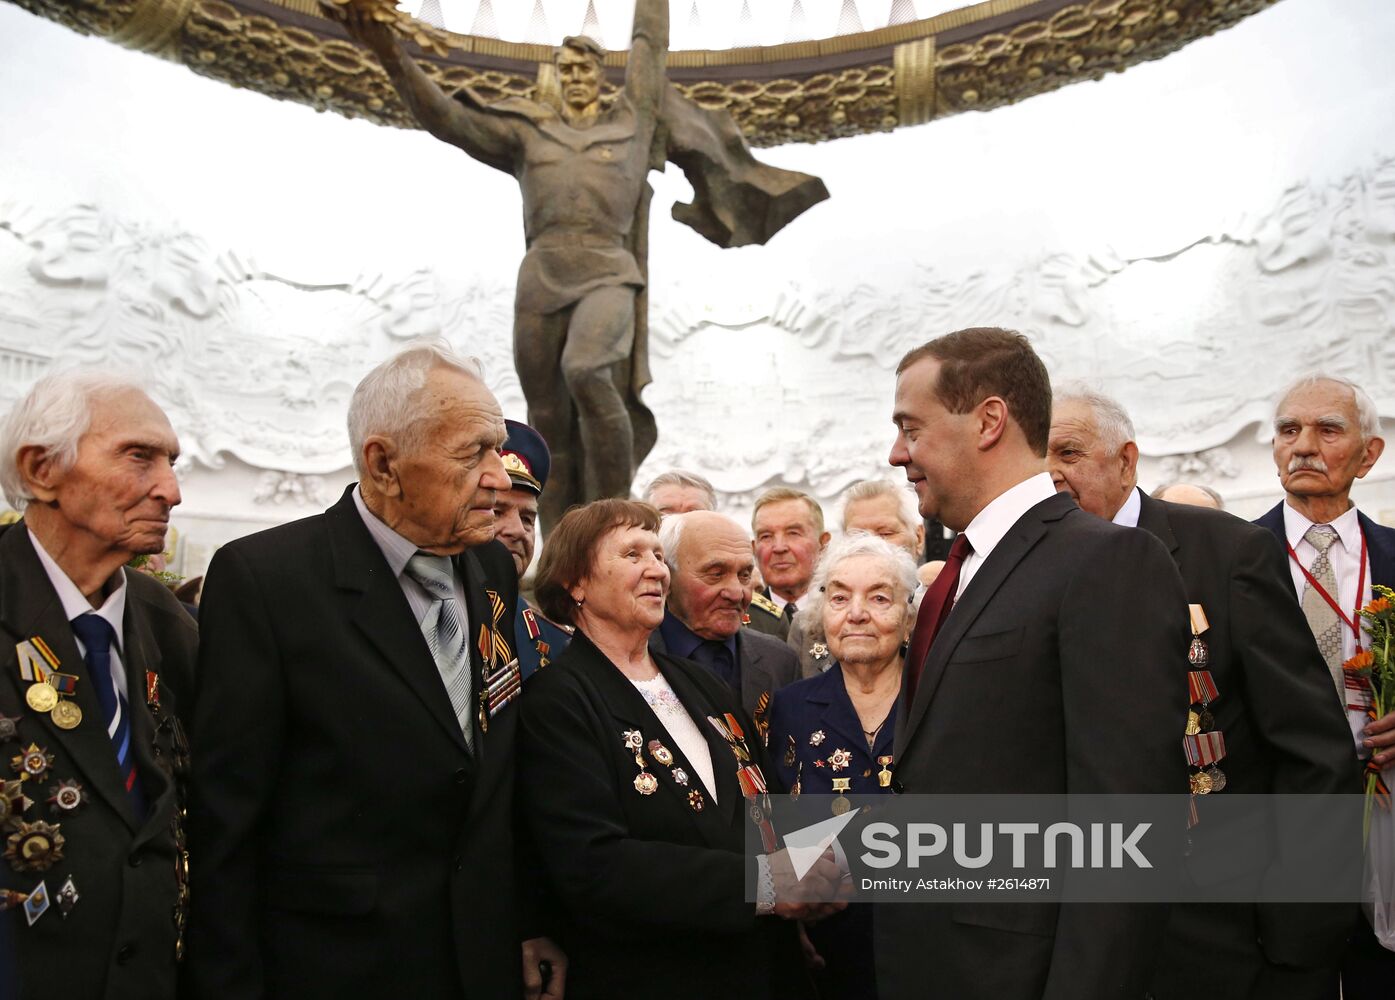 Russian Prime Minister Dmitry Medvedev visits Central Museum of Great Patriotic War in Moscow